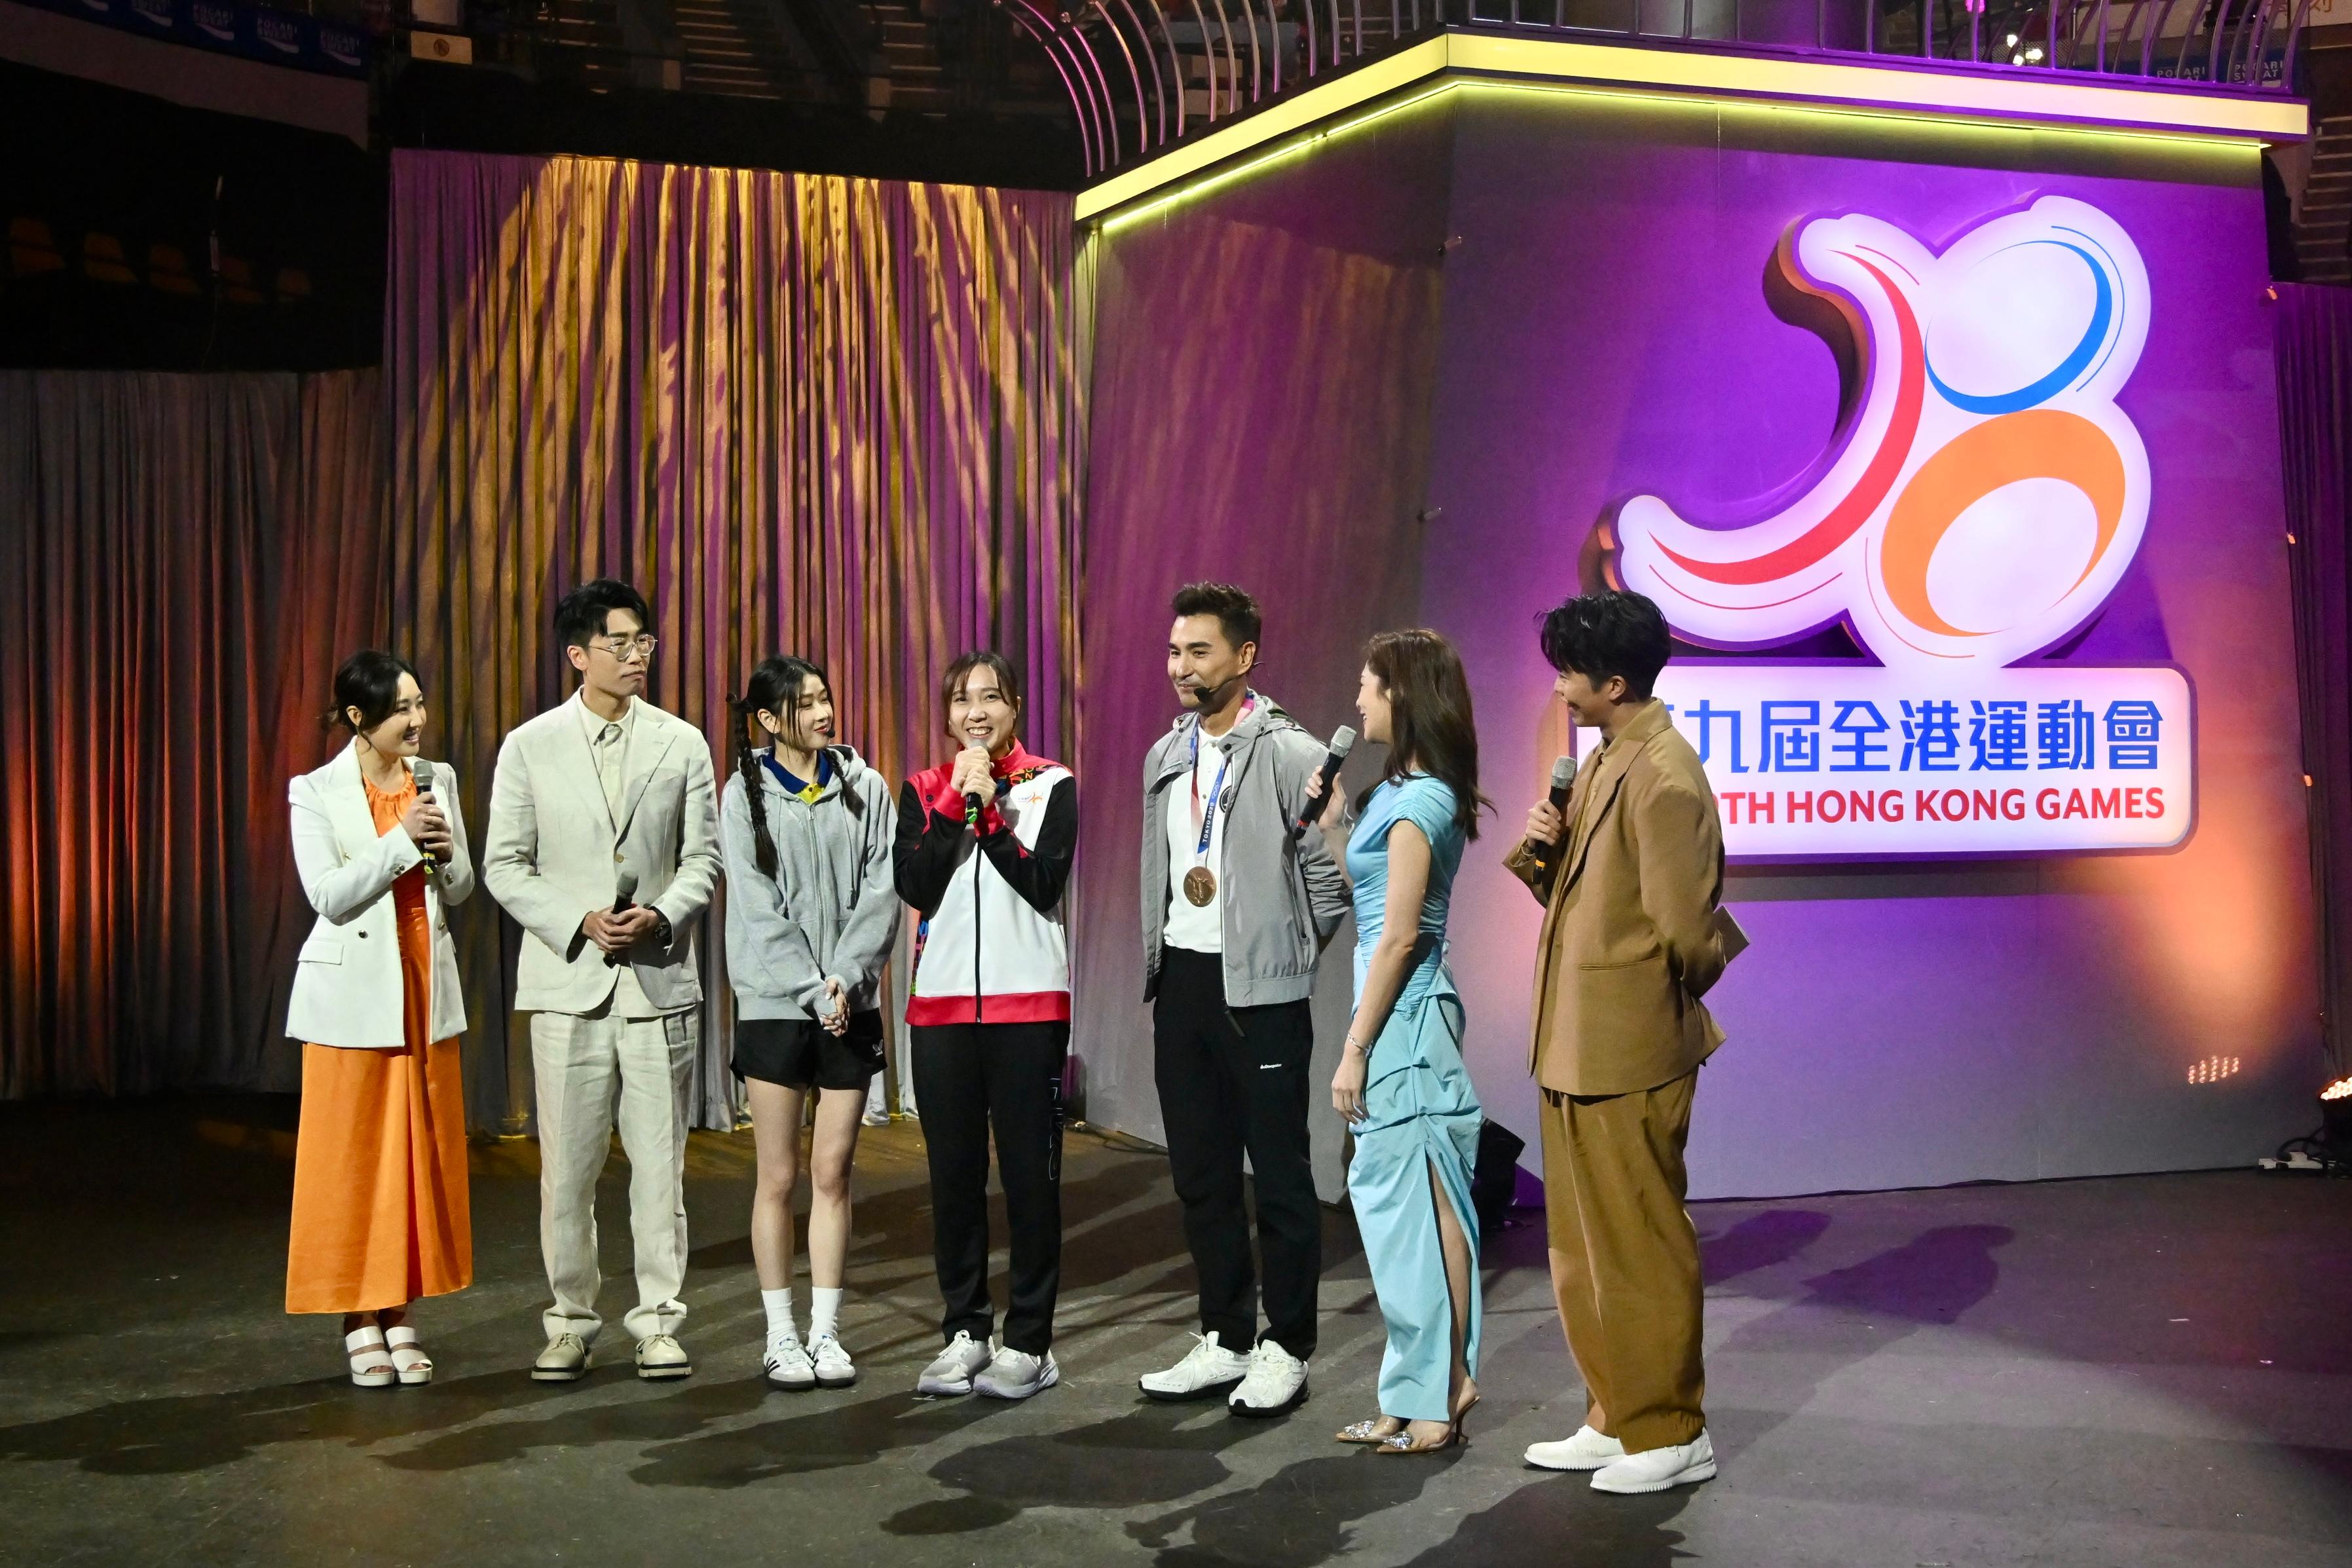 The 9th Hong Kong Games Opening Ceremony was held at the Hong Kong Coliseum today (April 21). Photo shows Hong Kong medallist Minnie Soo (centre) chatting with several artistes after a musical drama.